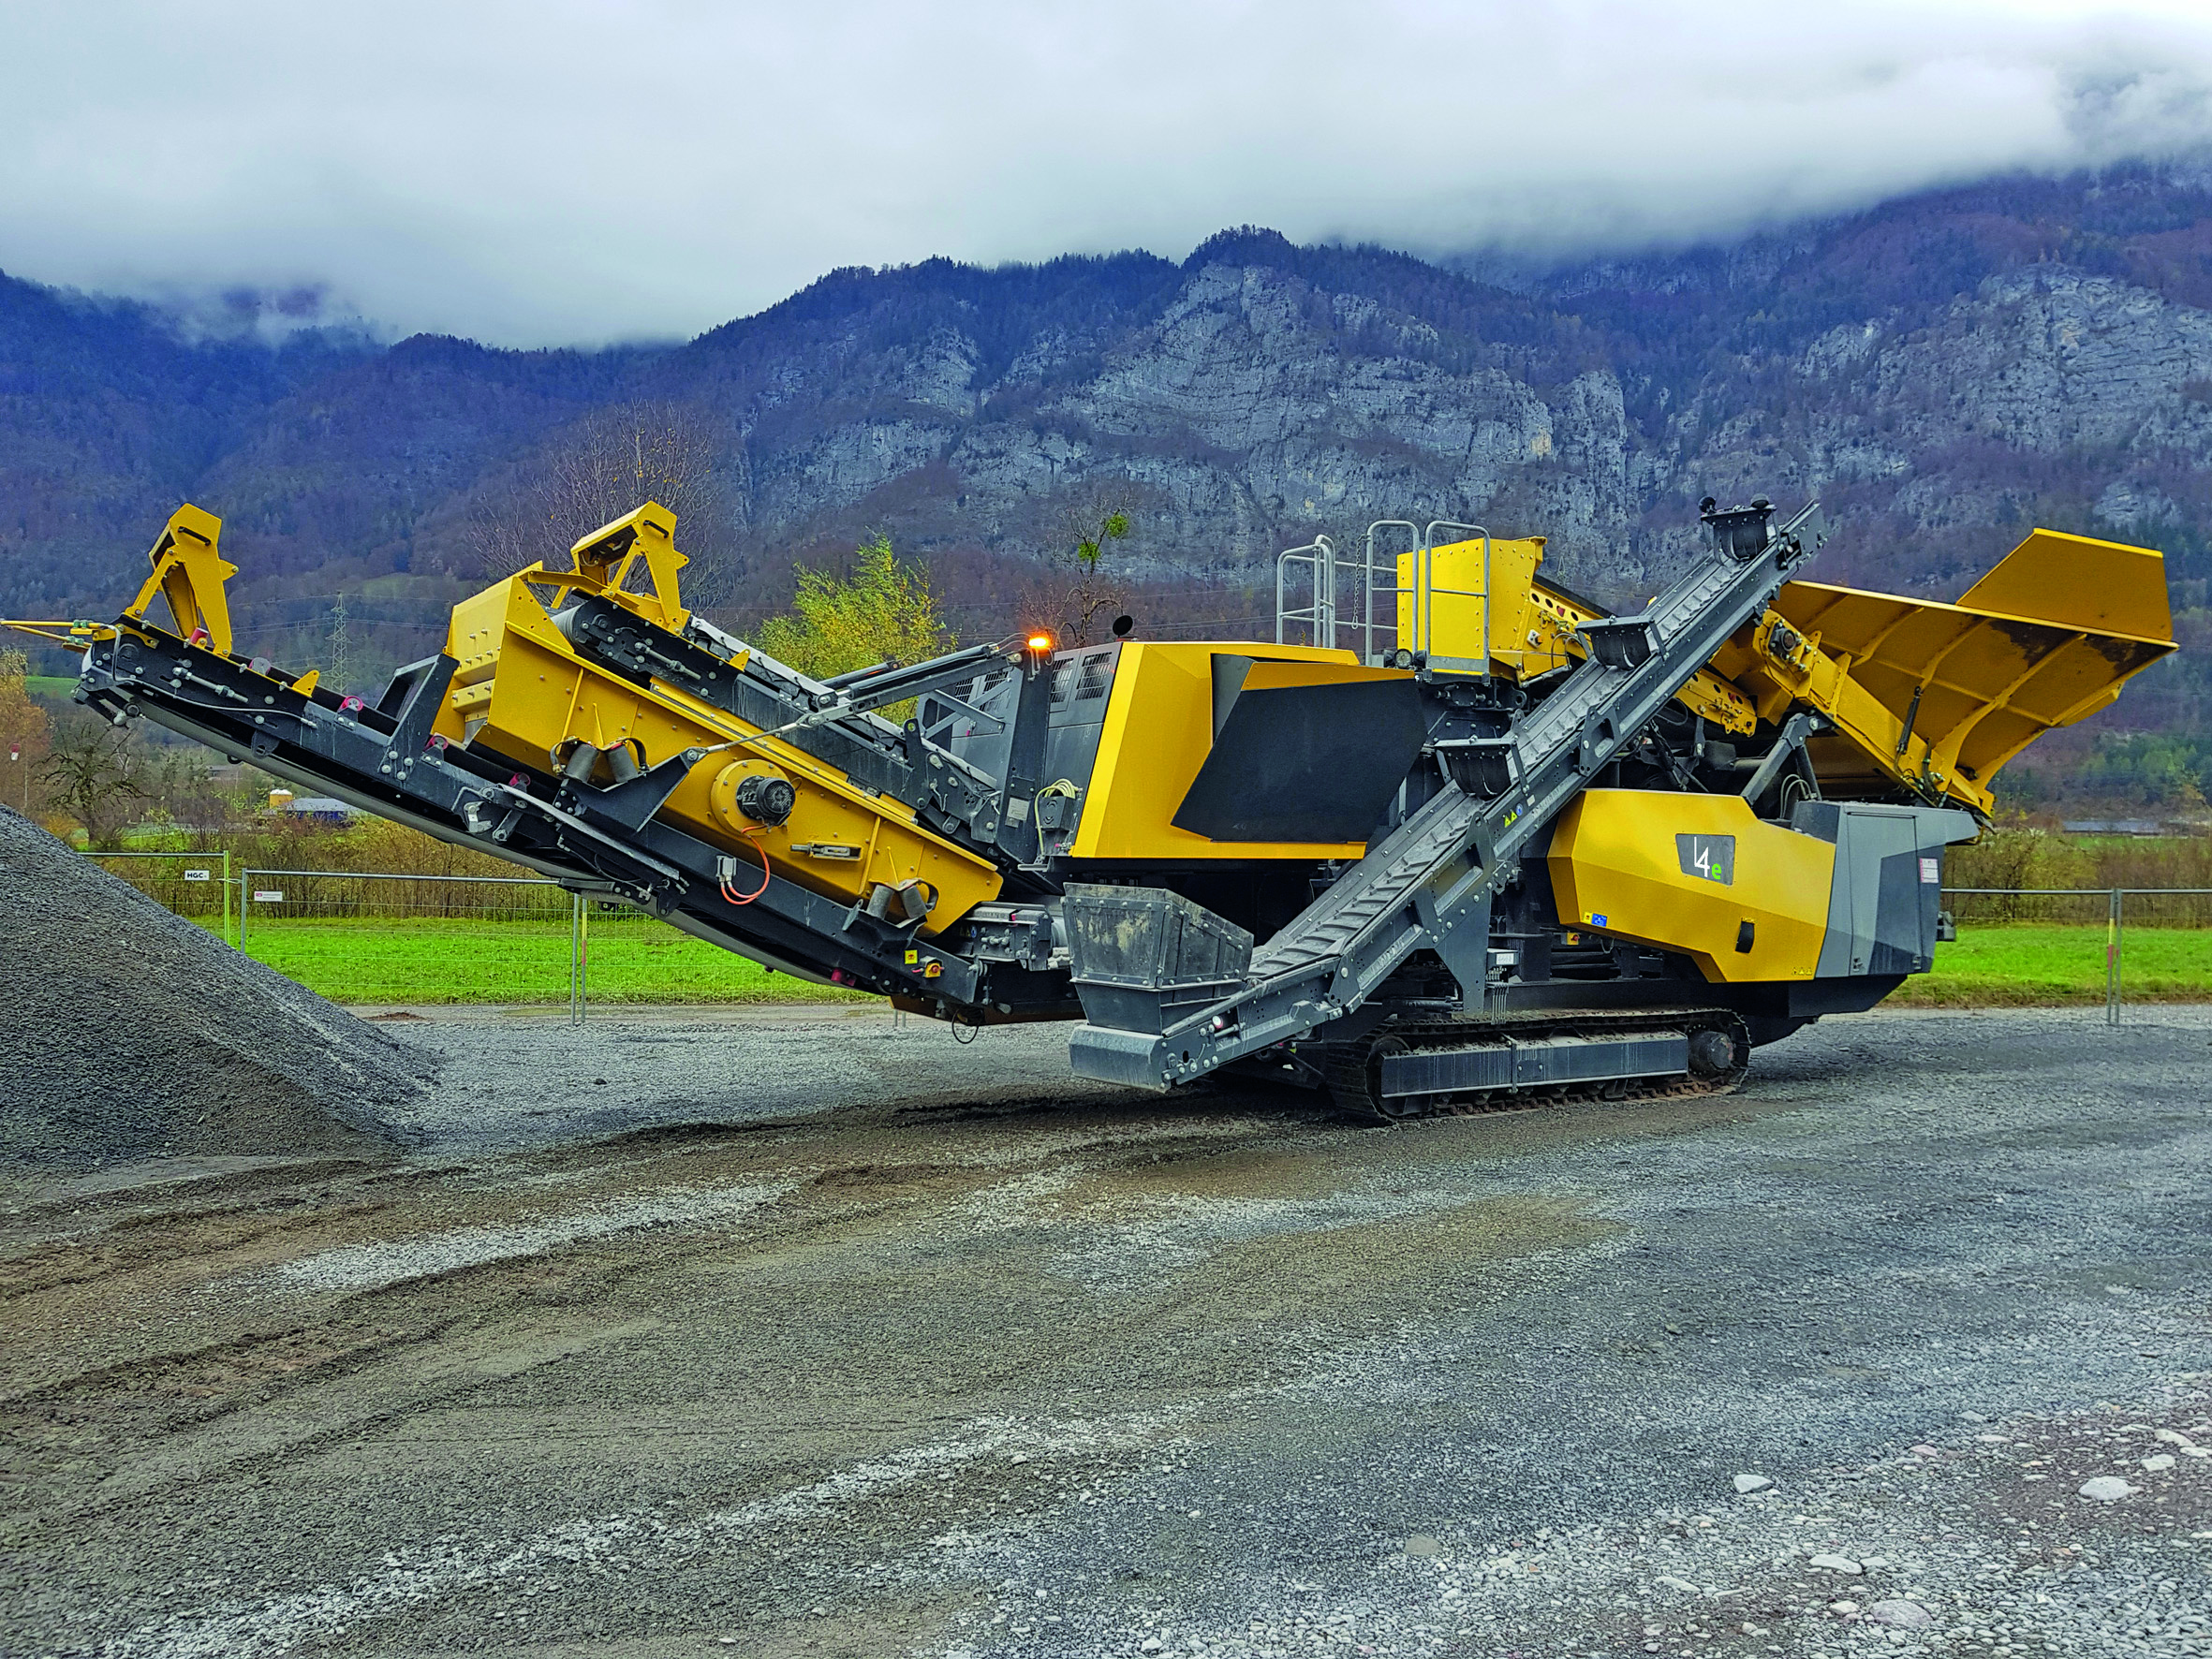 Two in one: With the new track-mobile reversible impact crusher Keestrack I4e RIC, the international processing specialist is presenting a powerful solution for secondary and tertiary crushing, which is particularly suitable for highly economical sand production (0-2 mm).